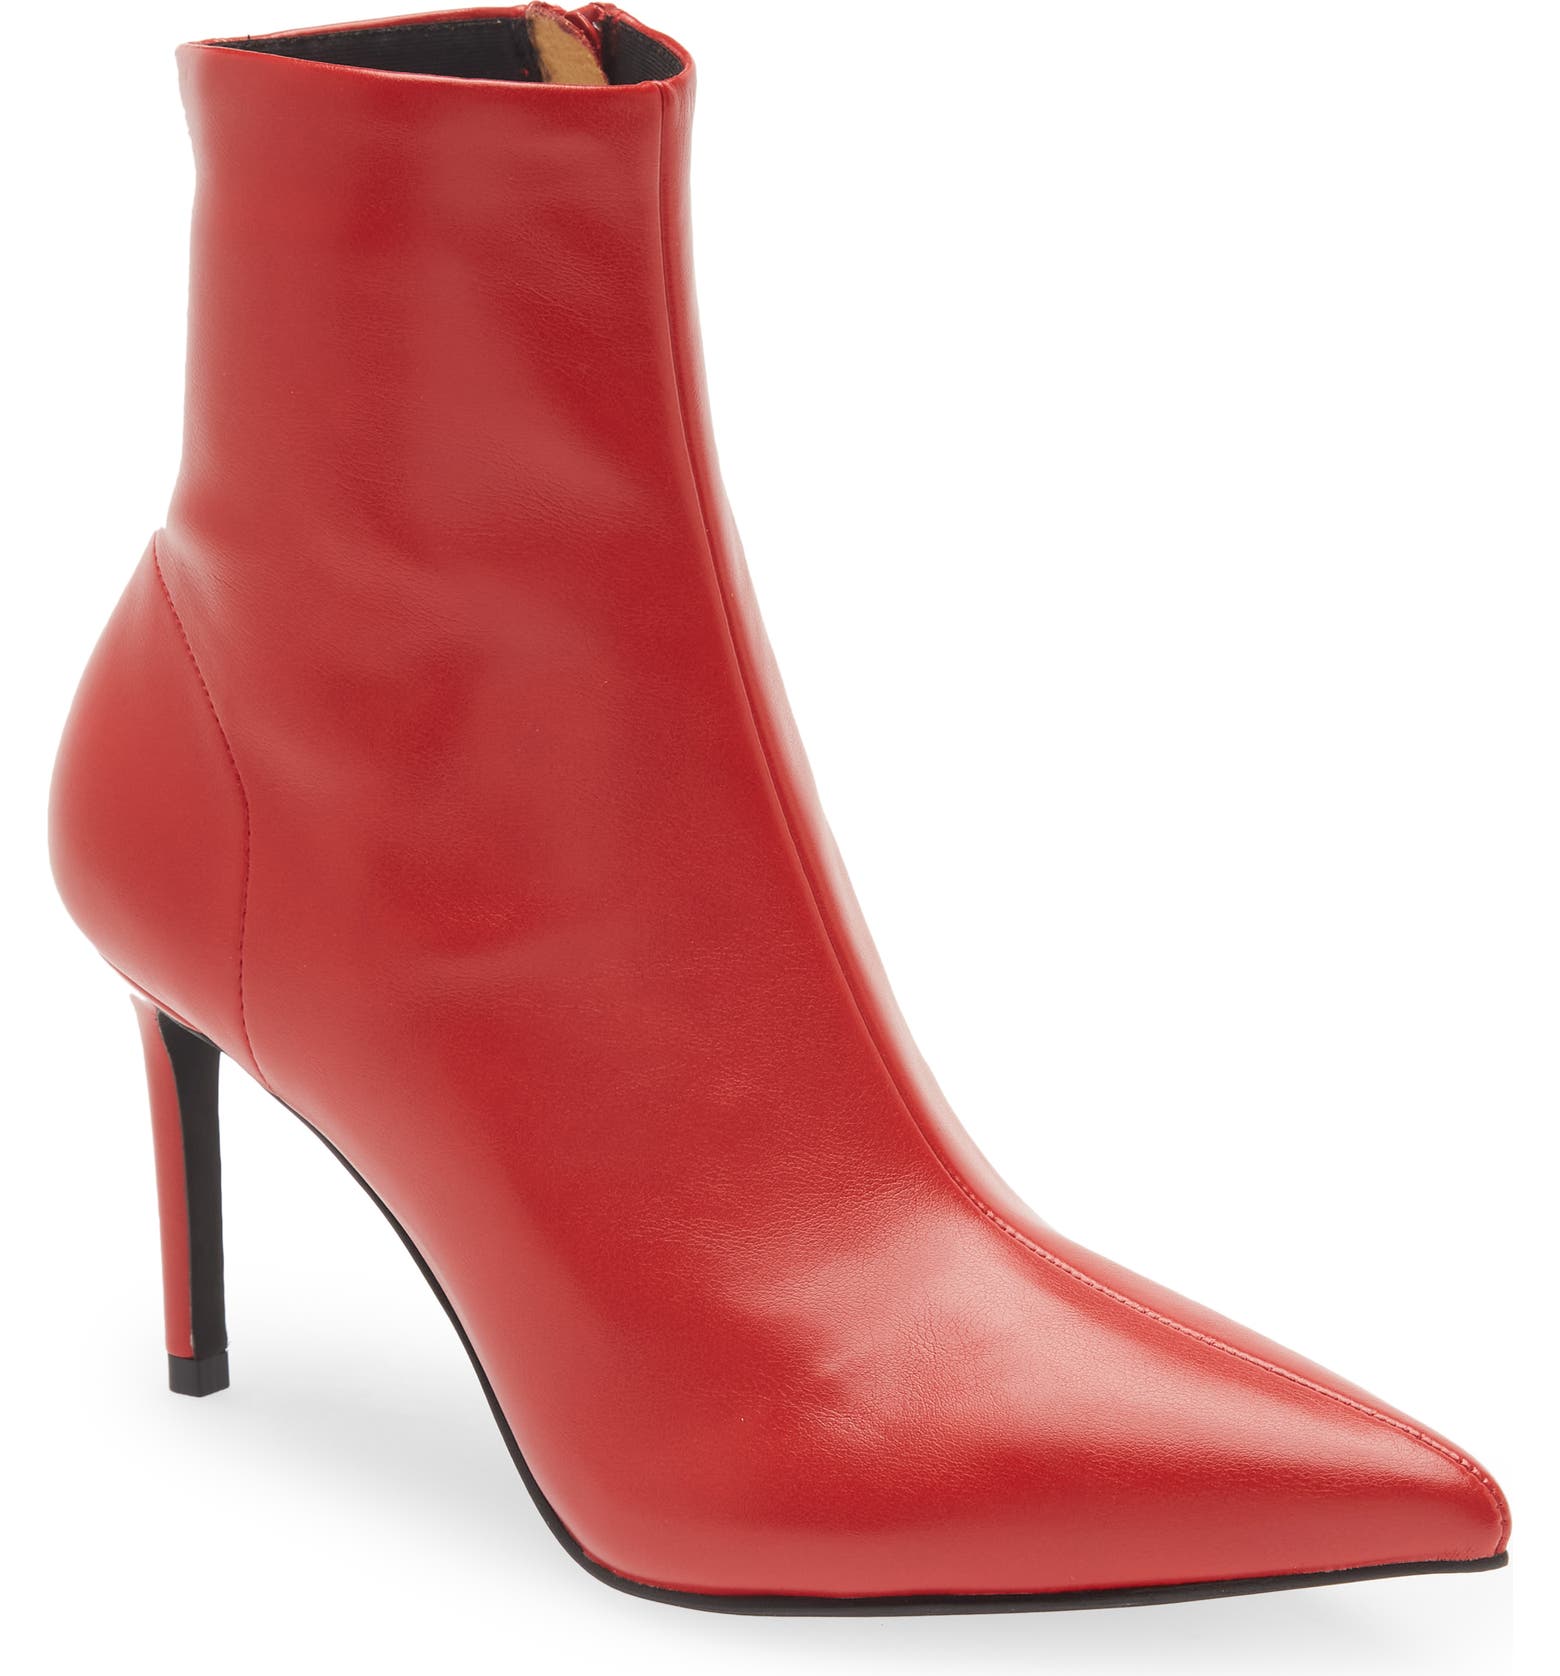 Red leather ankle boots